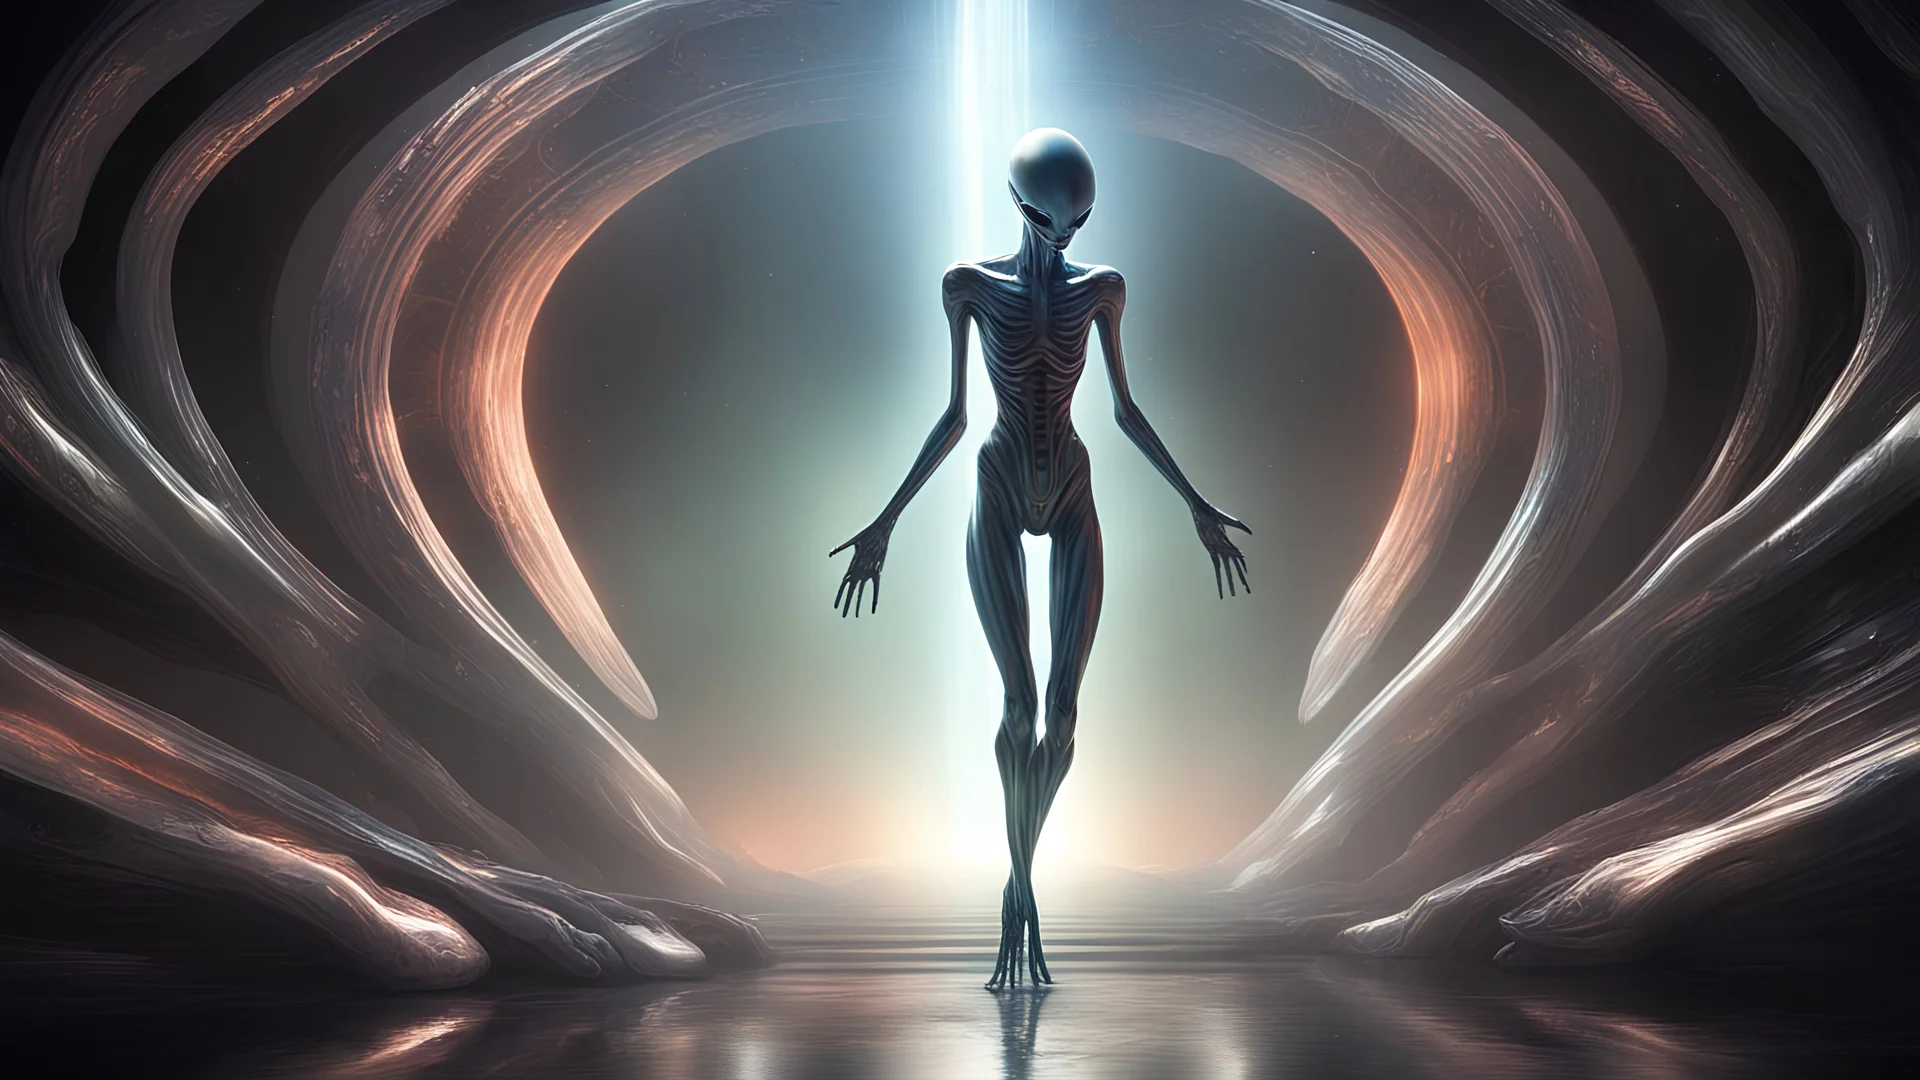 Emerging from the alien spaceship is a majestic extraterrestrial being, its sleek, silver body glistening under the spaceship's eerie light. The alien's metallic skin reflects a myriad of colors, hinting at its otherworldly origins. Its elongated limbs move with grace, as it steps onto foreign soil for the first time. This stunning image, possibly a digitally-enhanced photograph, captures the essence of a being from another world in exquisite detail, inviting viewers to marvel at its beauty and